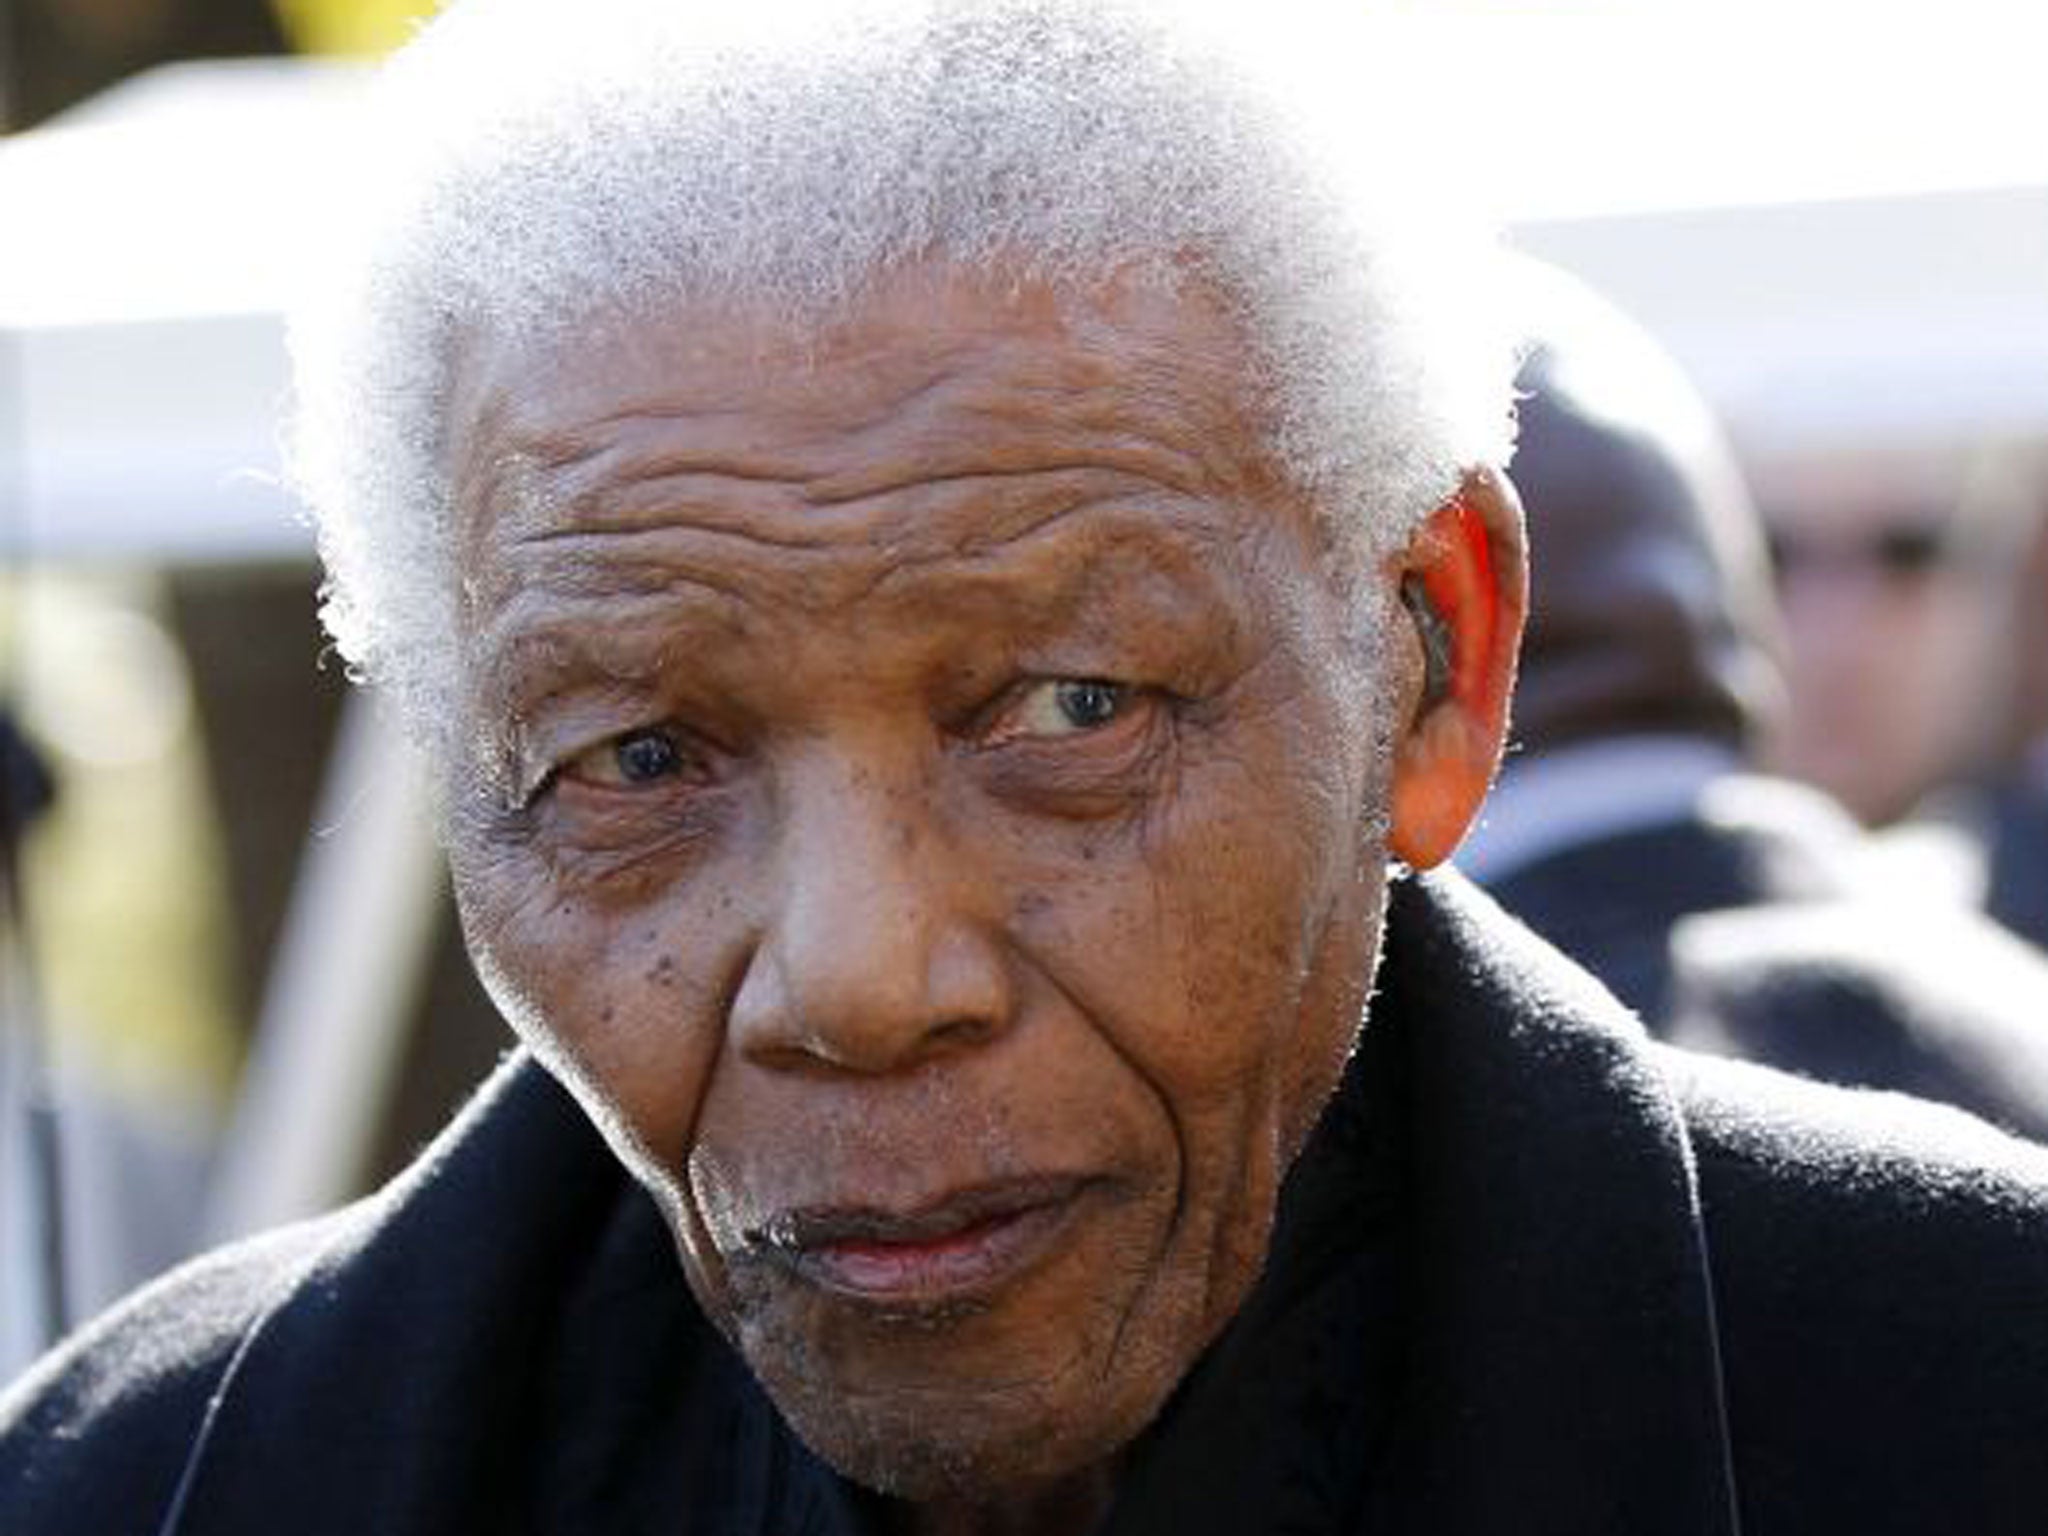 President Jacob Zuma said Mr Mandela remains in a serious condition but that over the last two days his doctors have said the improvements in his health have been sustained.